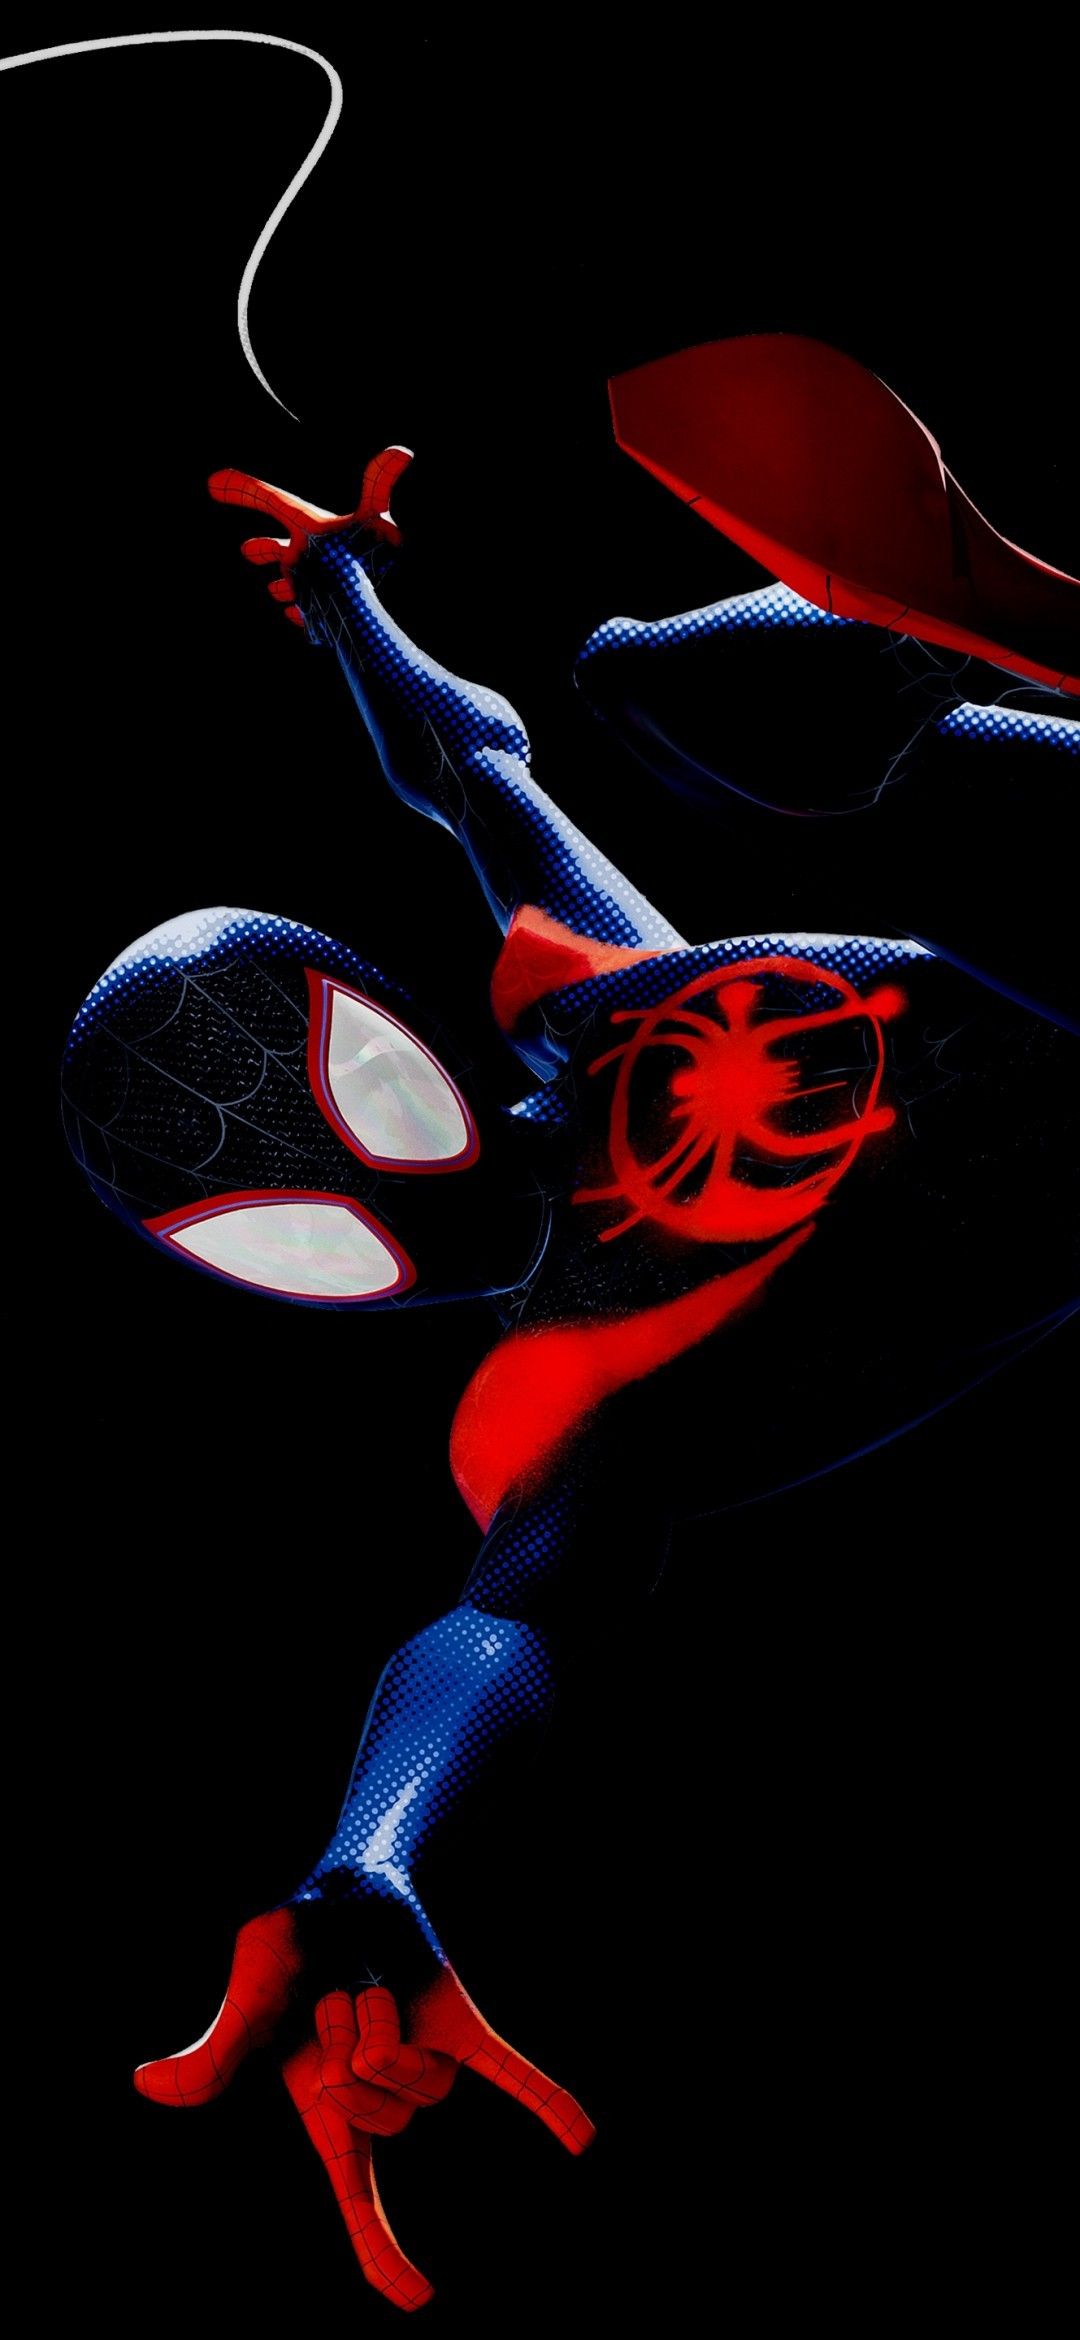 Download 1080x2340 Spider Man: Into The Spider Verse, Miles Morales, Animation Wallpaper For Xiaomi Mi 9 & Mi Mix 3 & Black Shark Vivo V15 Pro, OnePlus 6T, Huawei Y9 2019